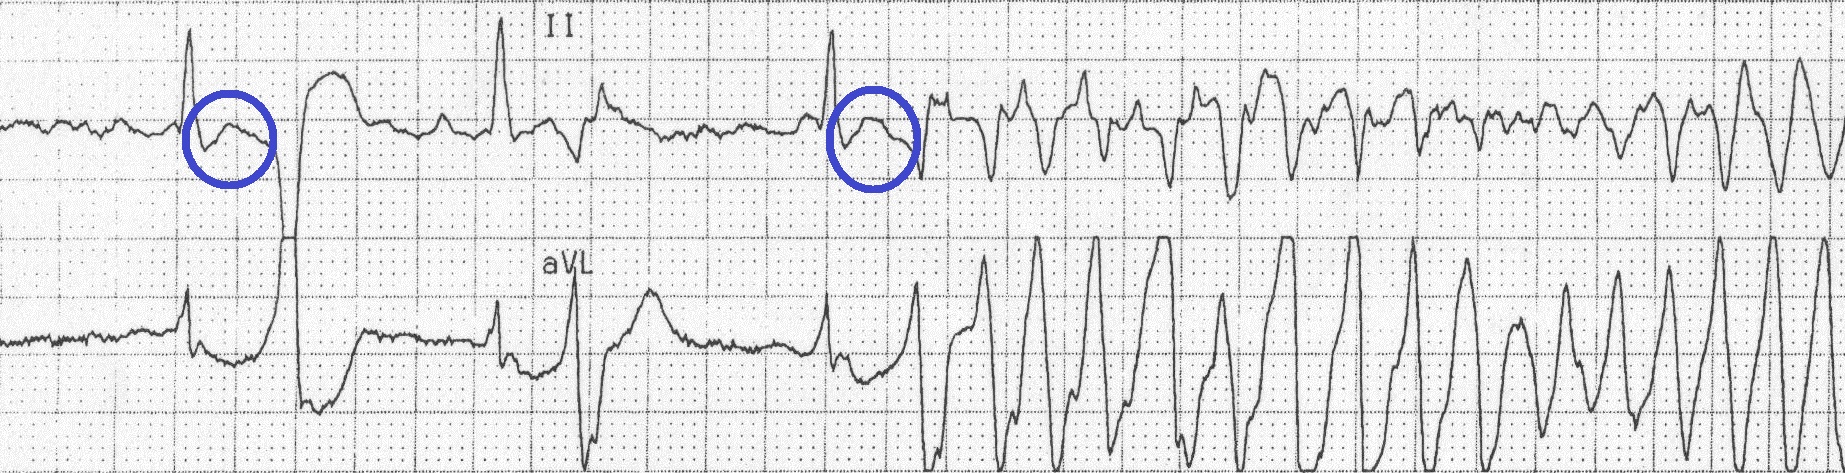 EKG showing R-ont-T phenomena that eventually transitions to torsades (source) 